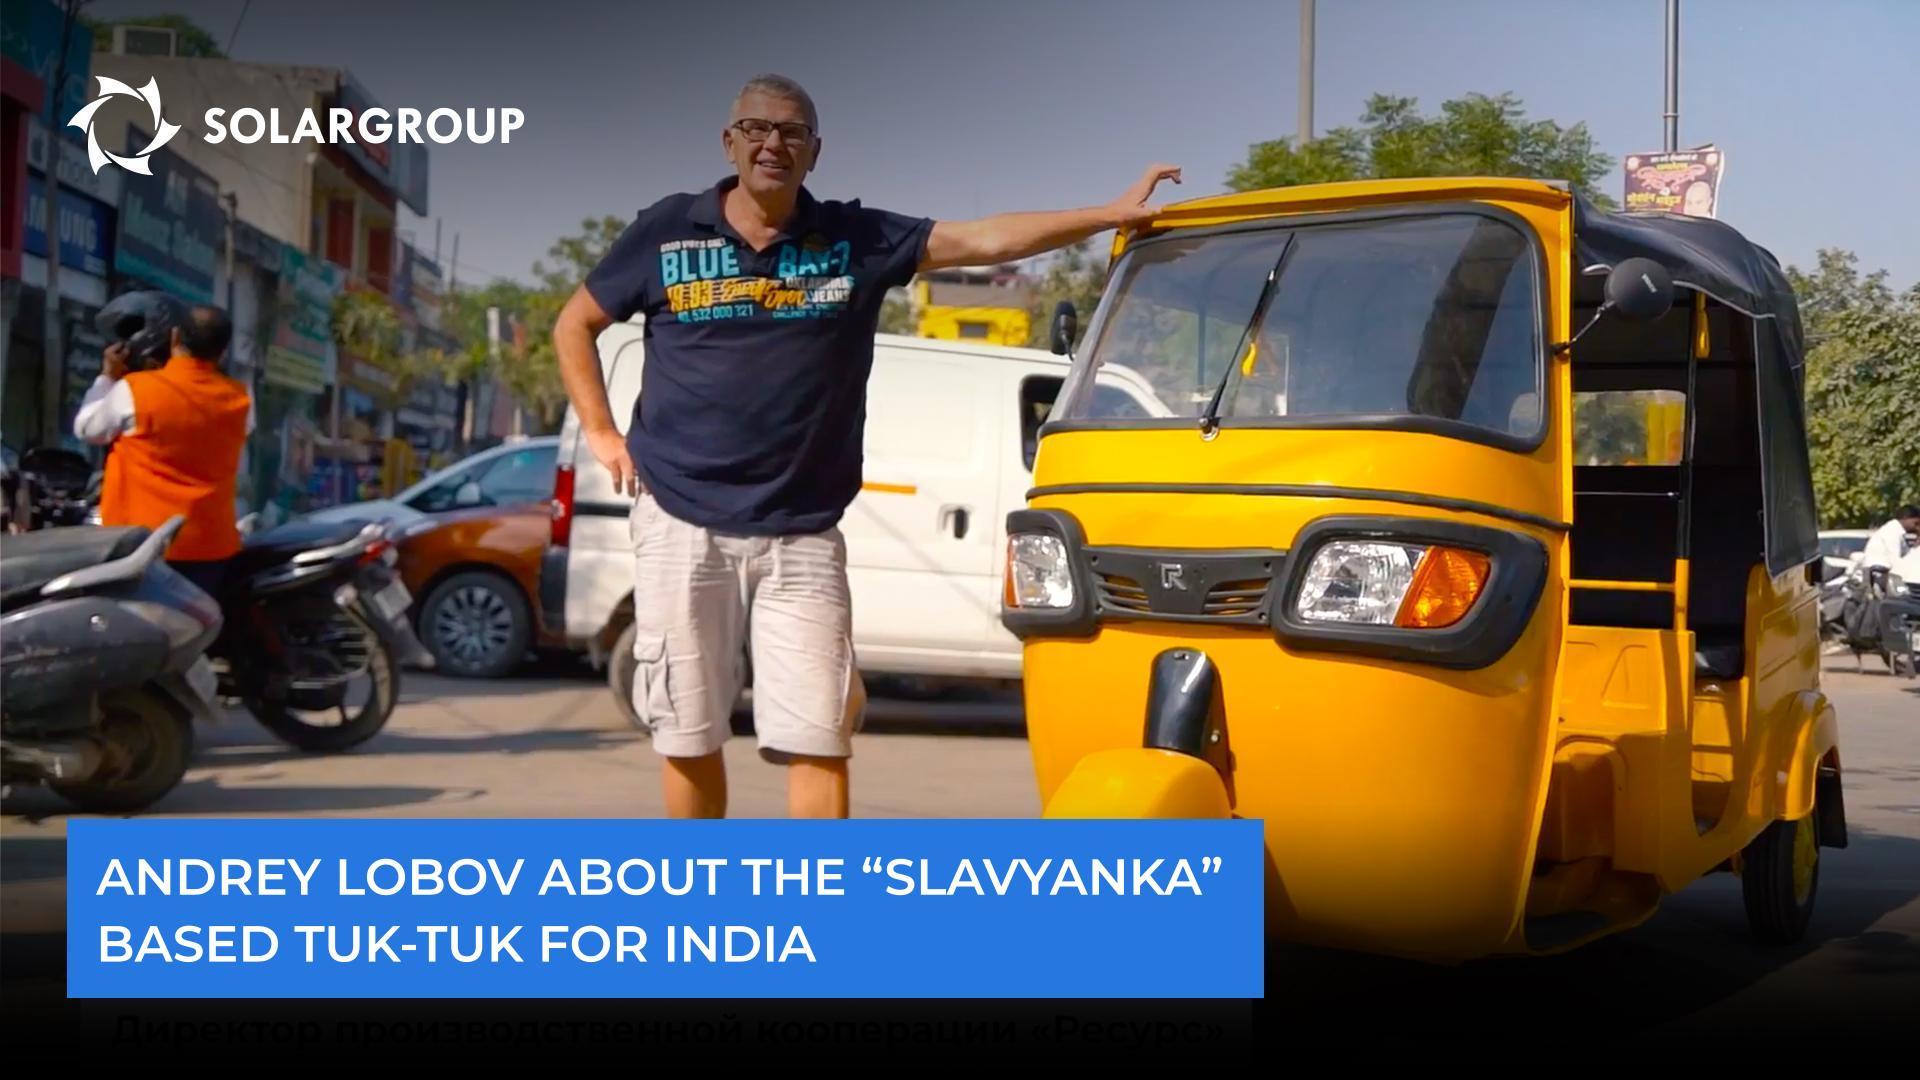 "Electric motors that rely on the "Slavyanka" technology will be in demand here," Andrey Lobov about a tuk-tuk for India